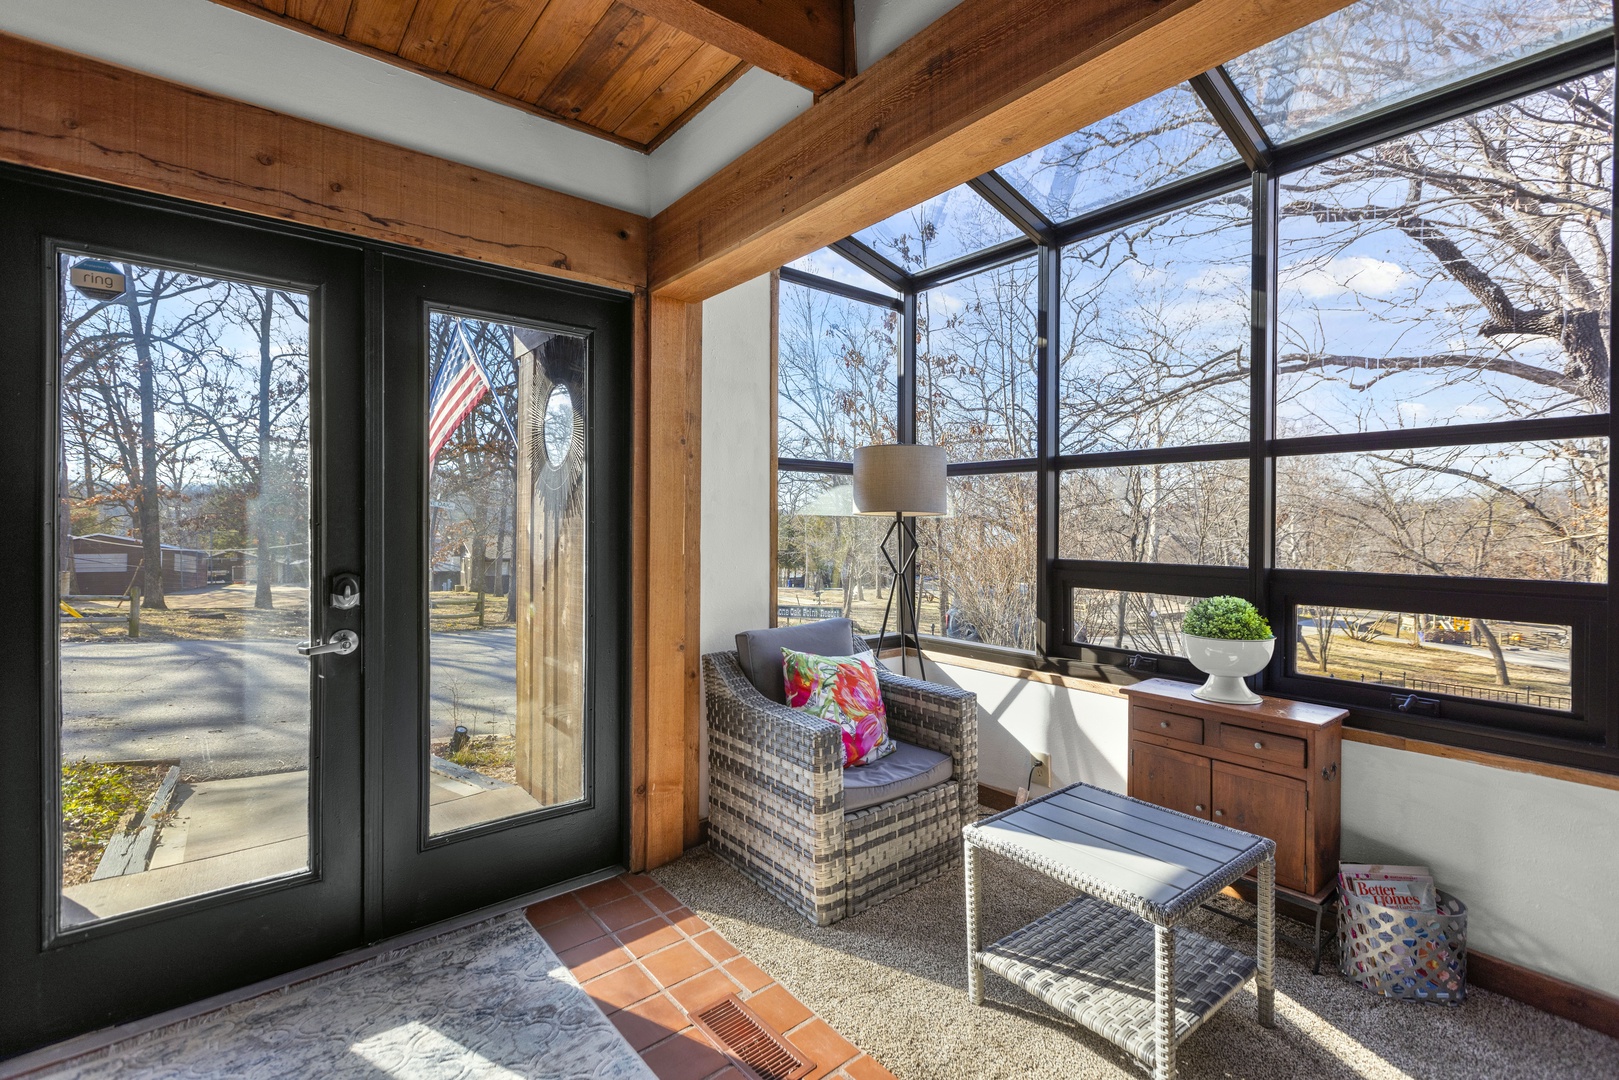 Sip morning coffee or play cards in the sunroom with stunning lake views